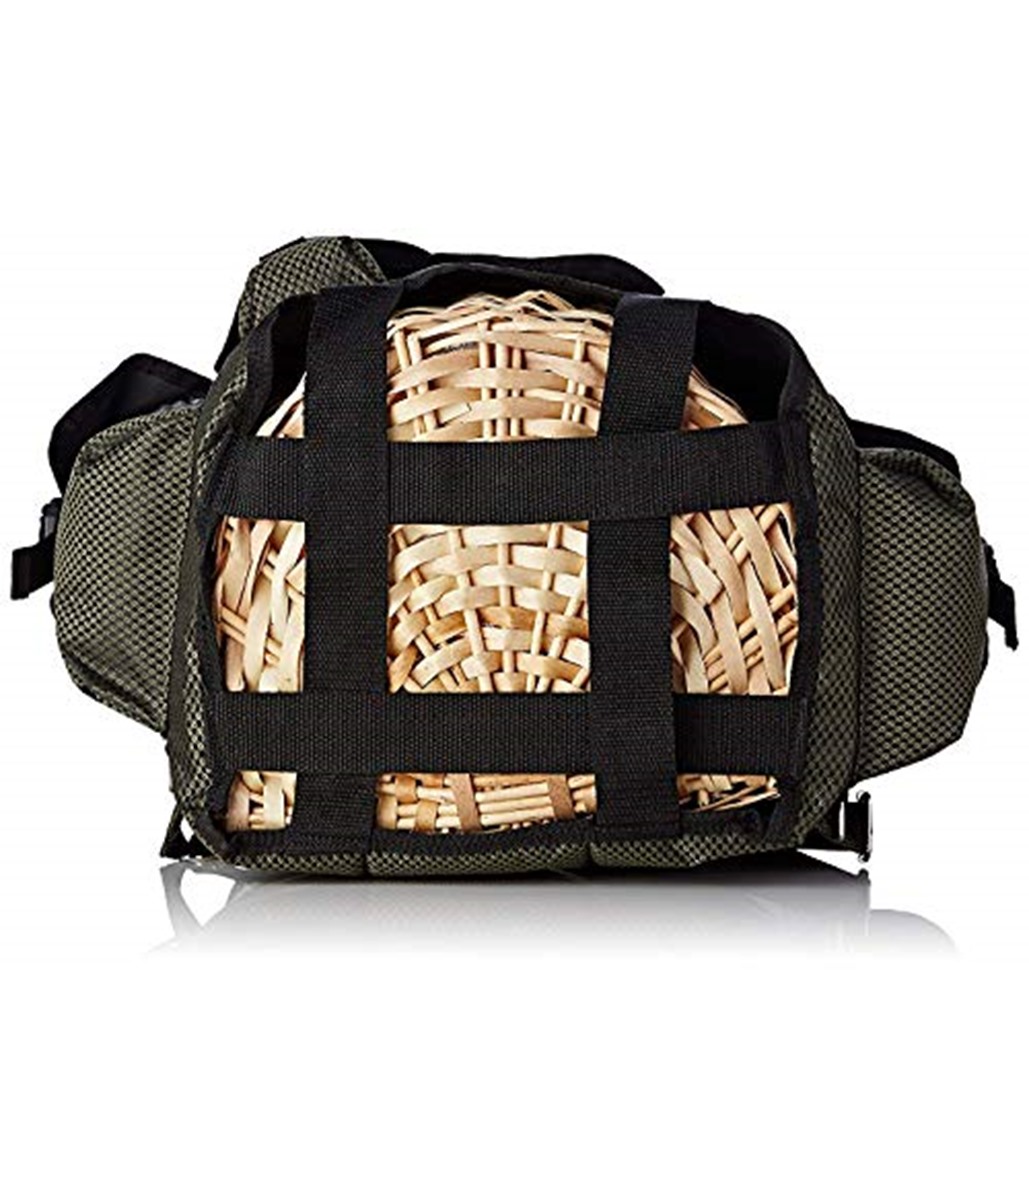 BACKPACK WITH WICKER BASKET